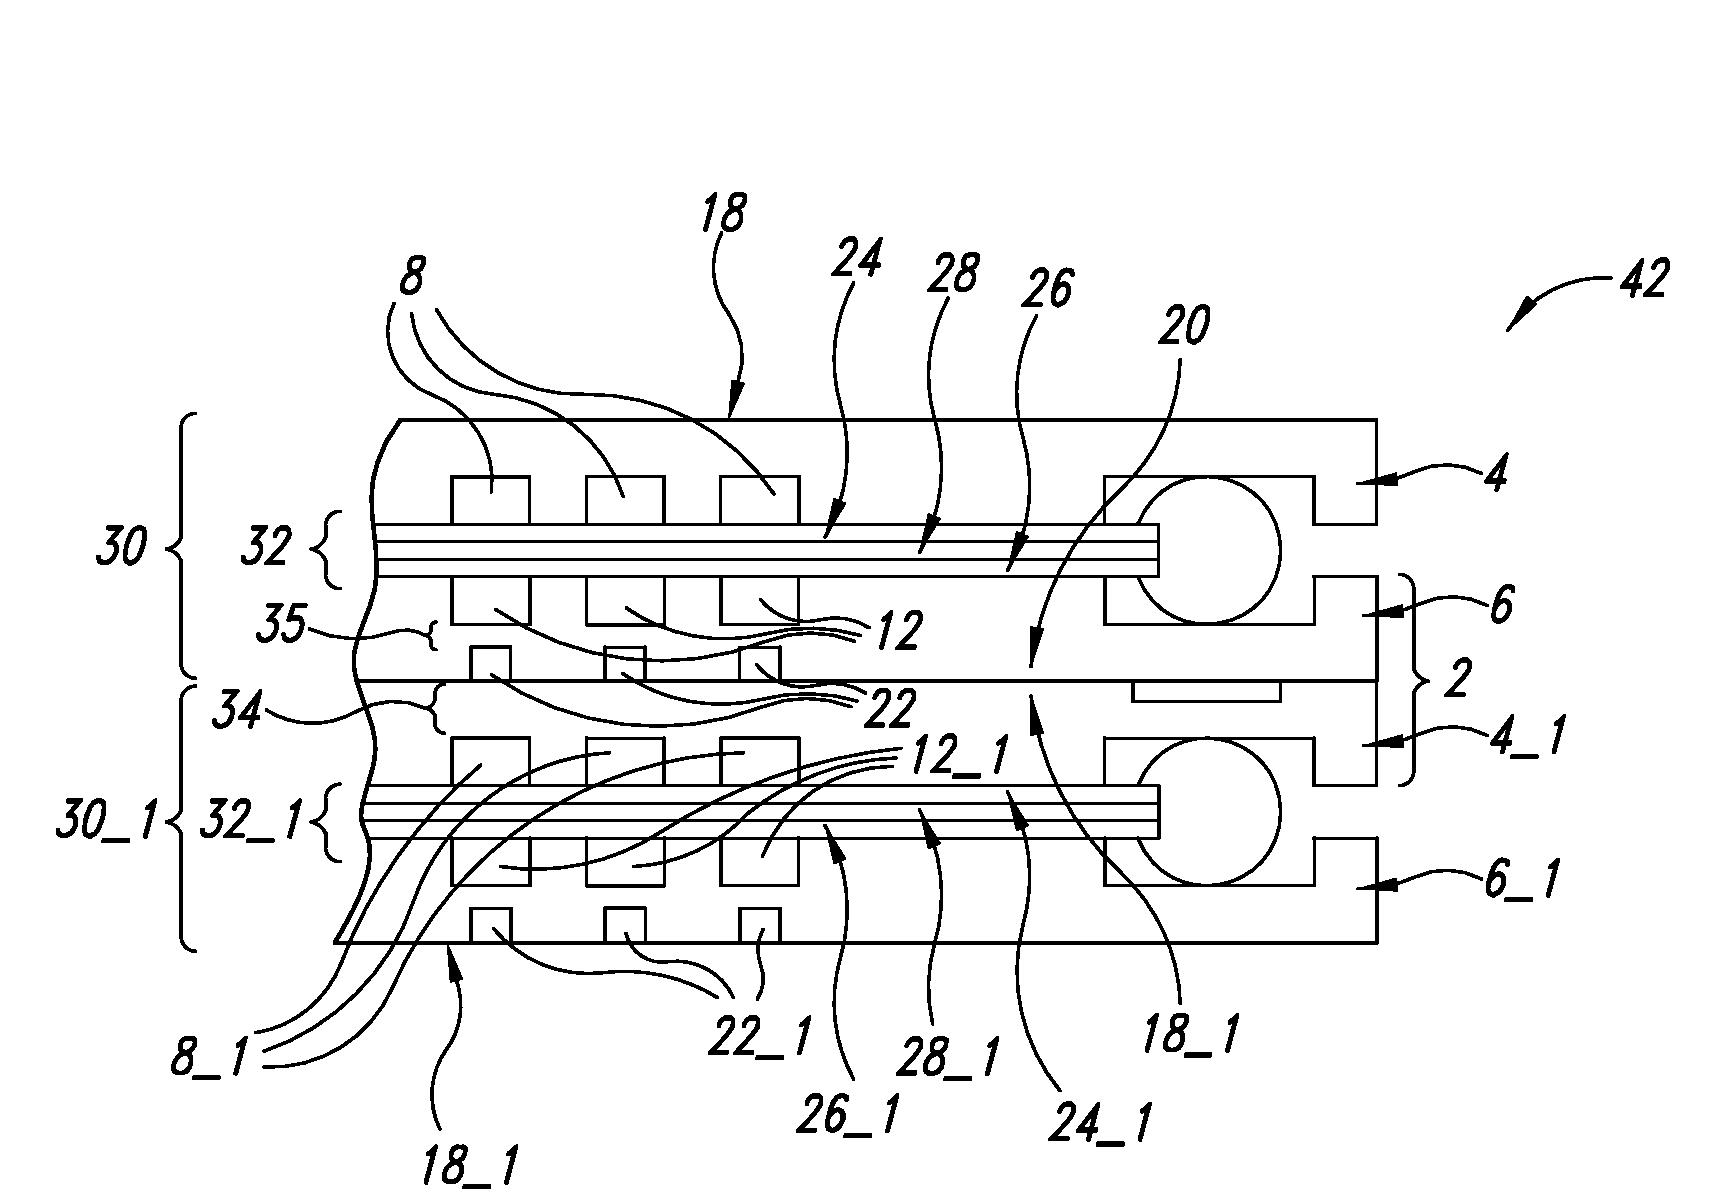 Method of operating a fuel cell stack at low pressure and low power conditions